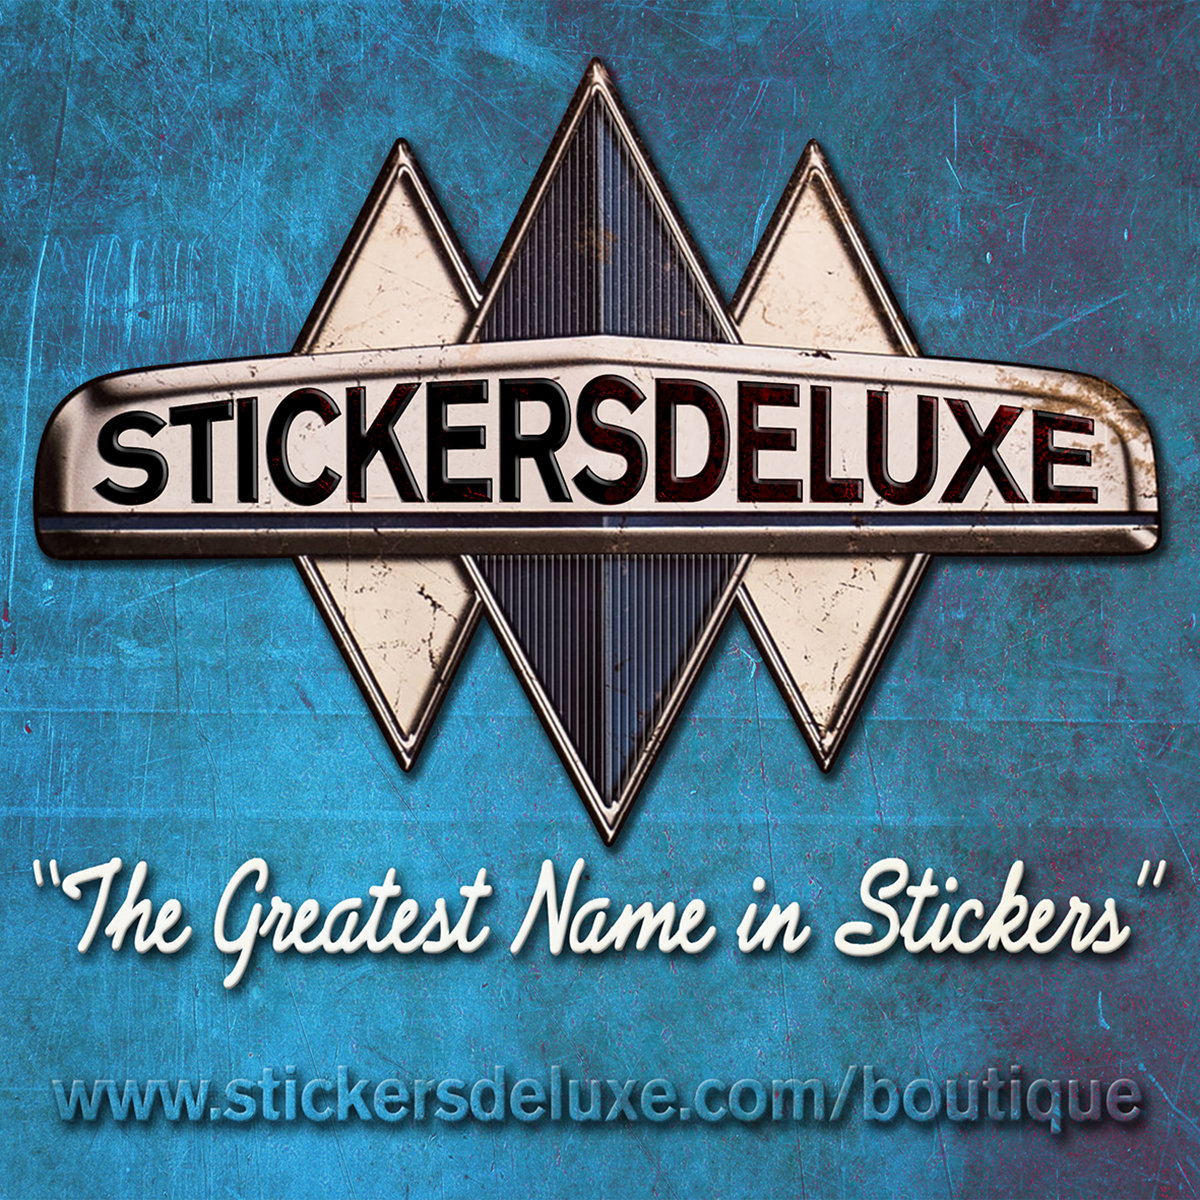 Stickers Deluxe
Stickers & apparel, finest quality...